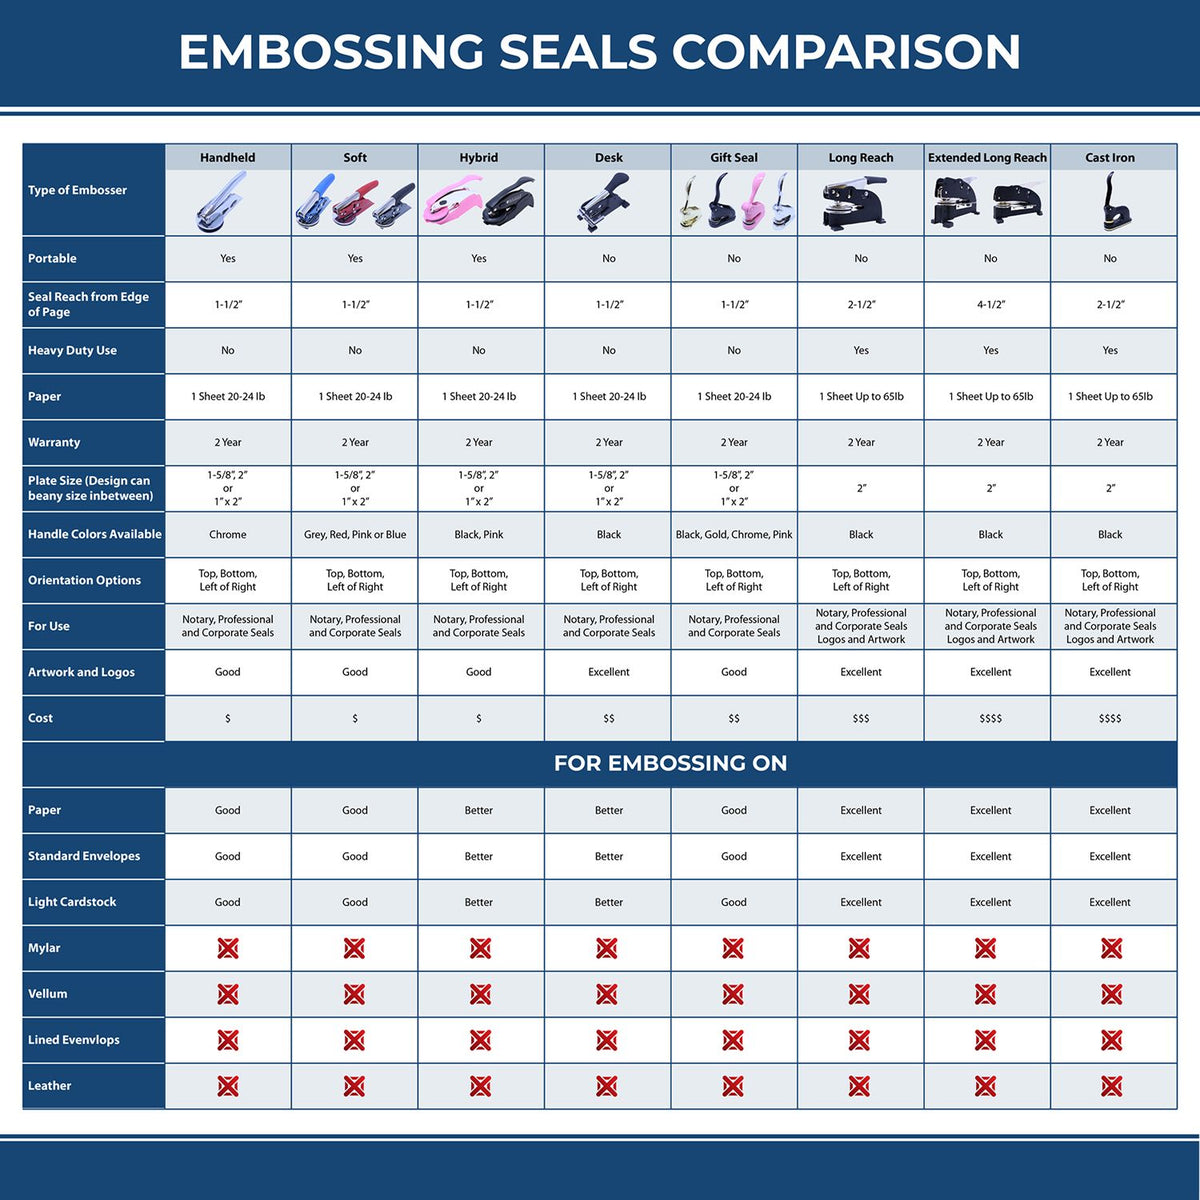 A comparison chart for the different types of mount models available for the State of New Mexico Soft Land Surveyor Embossing Seal.